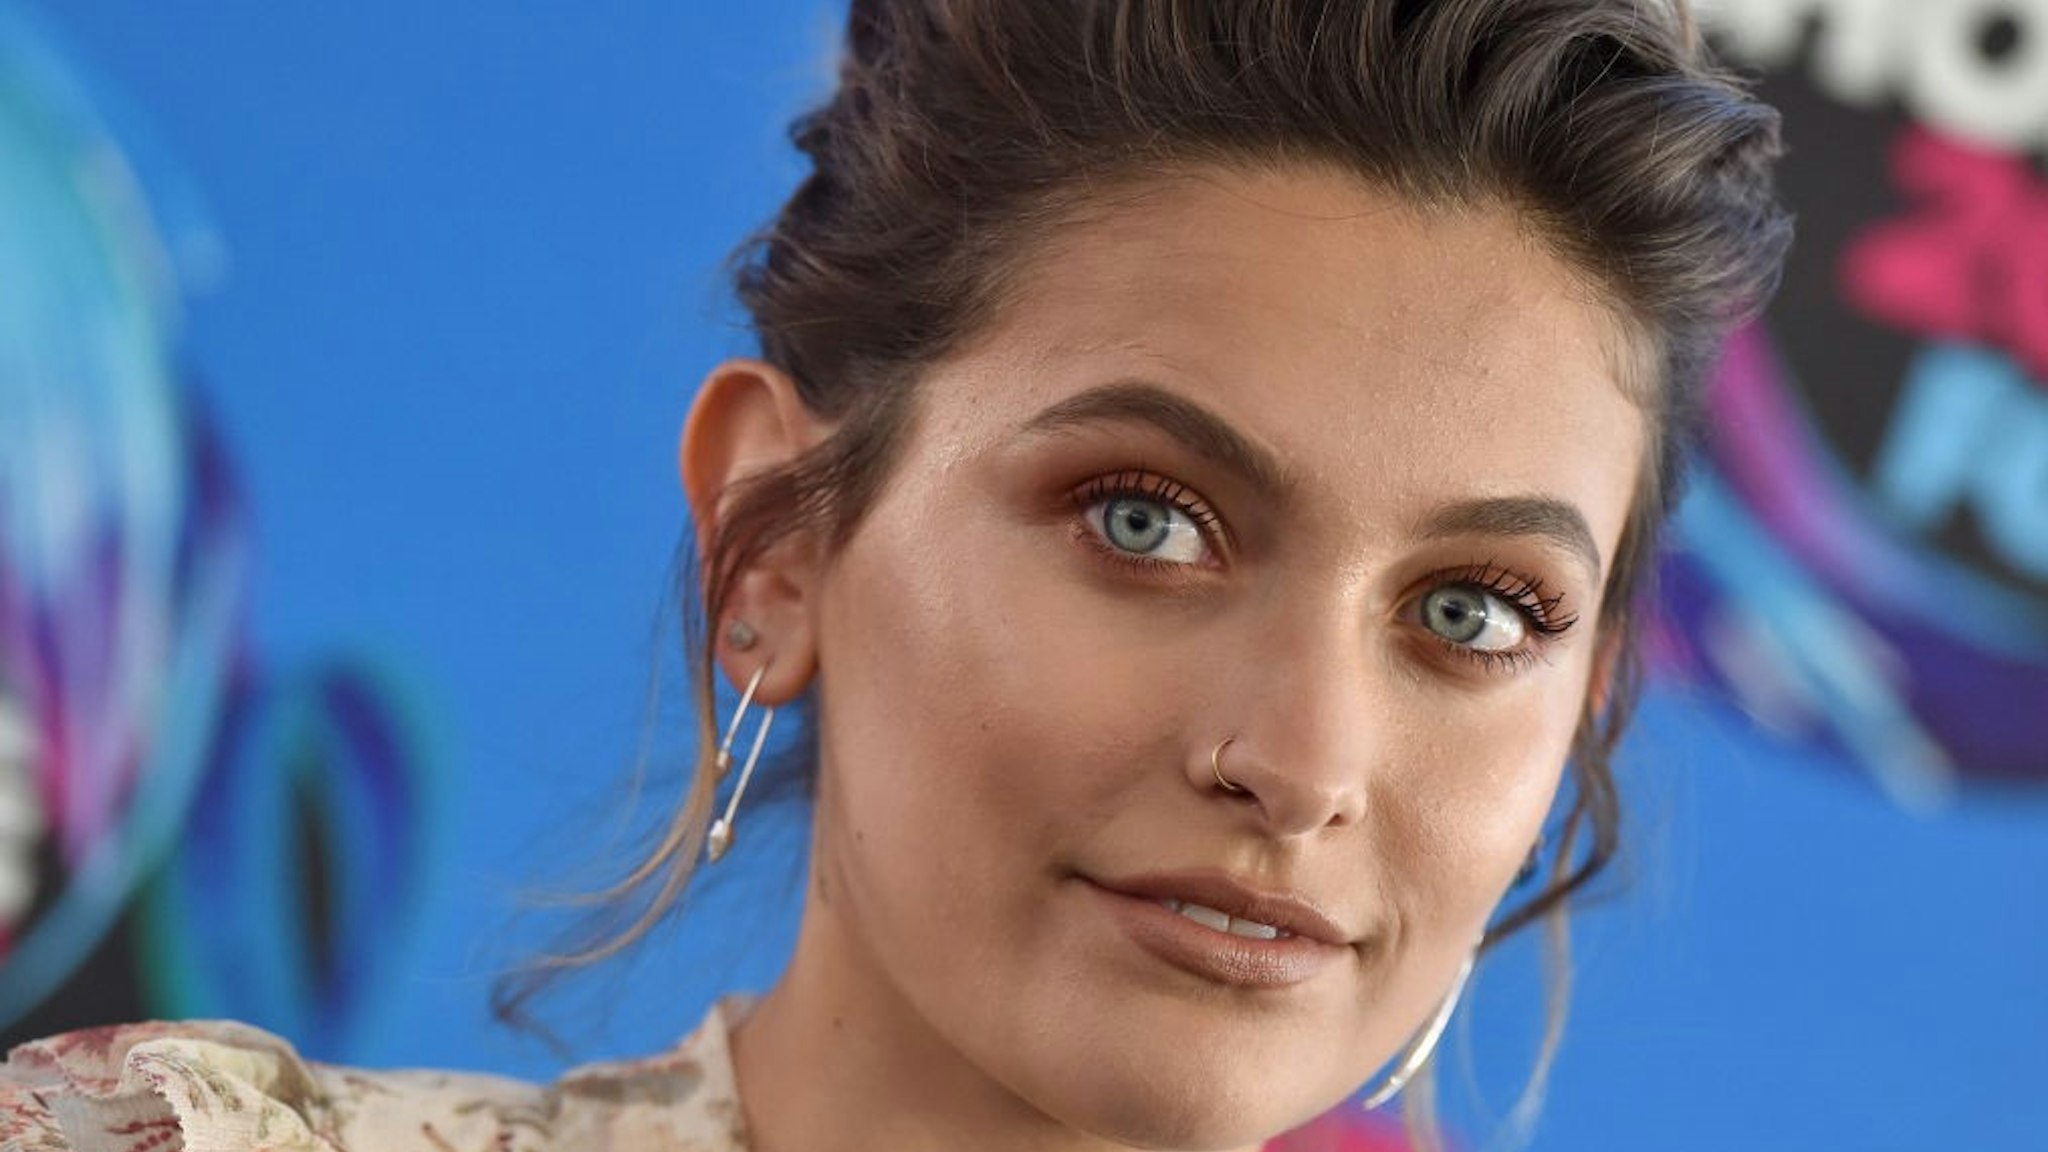 LOS ANGELES, CA - AUGUST 13: Actress Paris Jackson arrives at the Teen Choice Awards 2017 at Galen Center on August 13, 2017 in Los Angeles, California. (Photo by